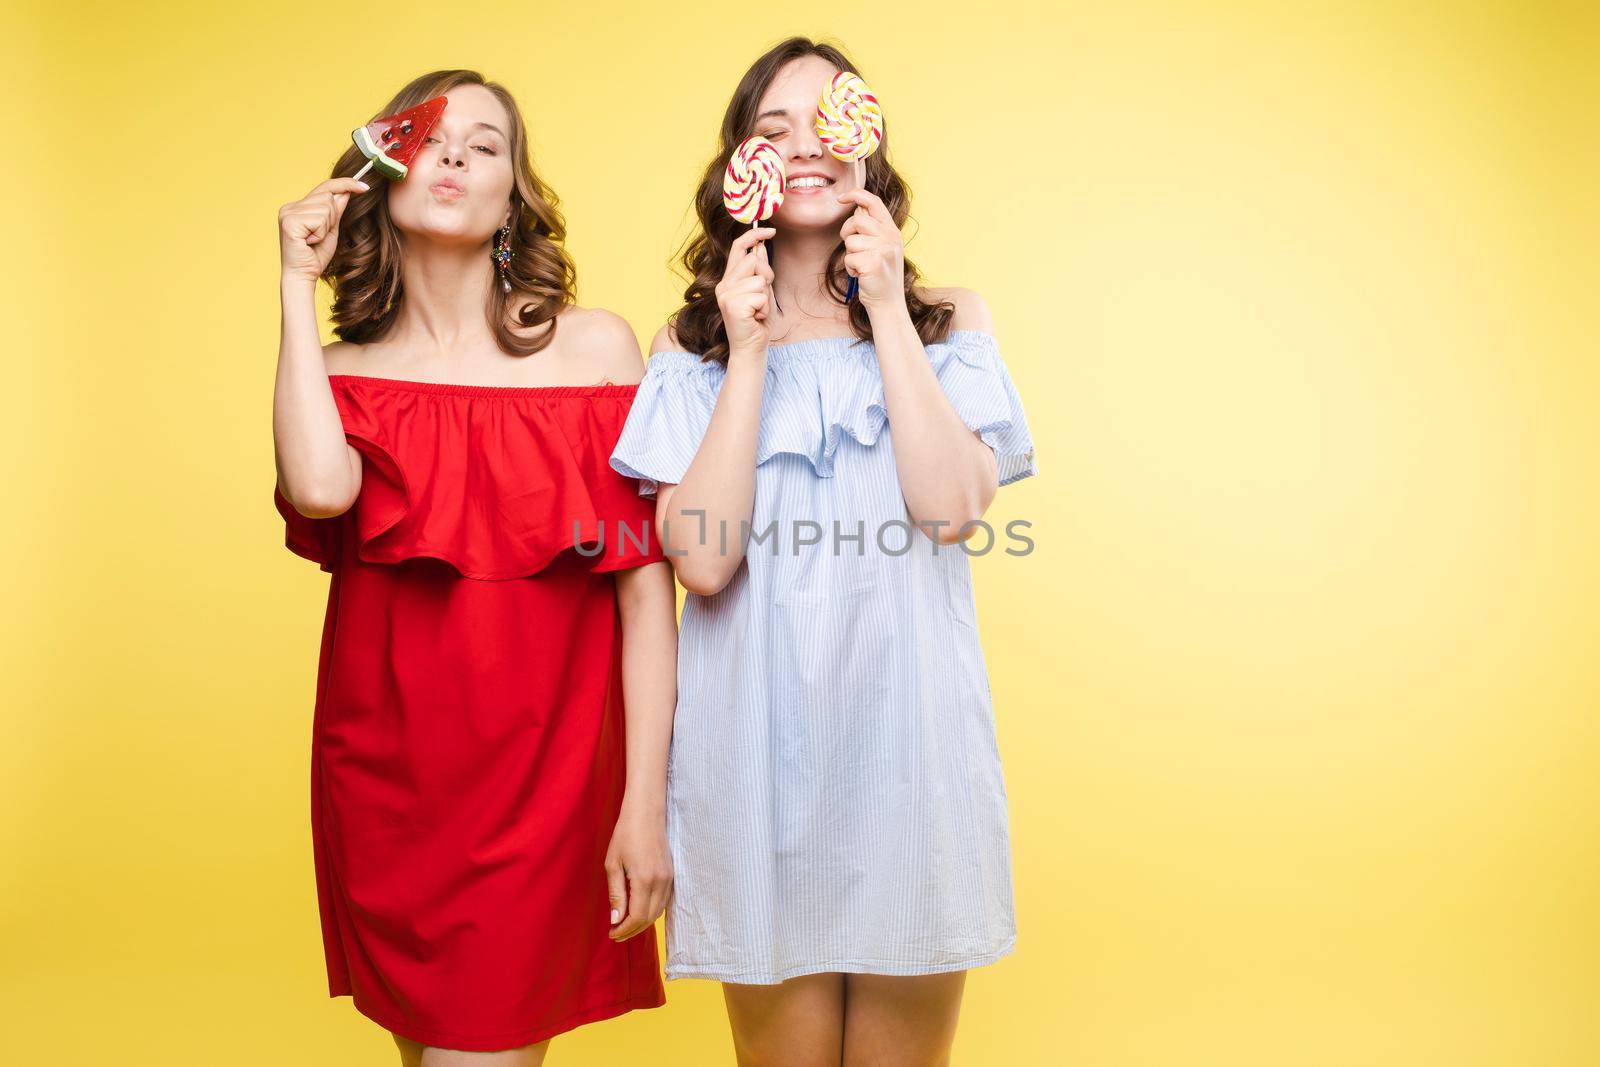 Horizontal portrait of two cheerful young women having fun together on background by StudioLucky